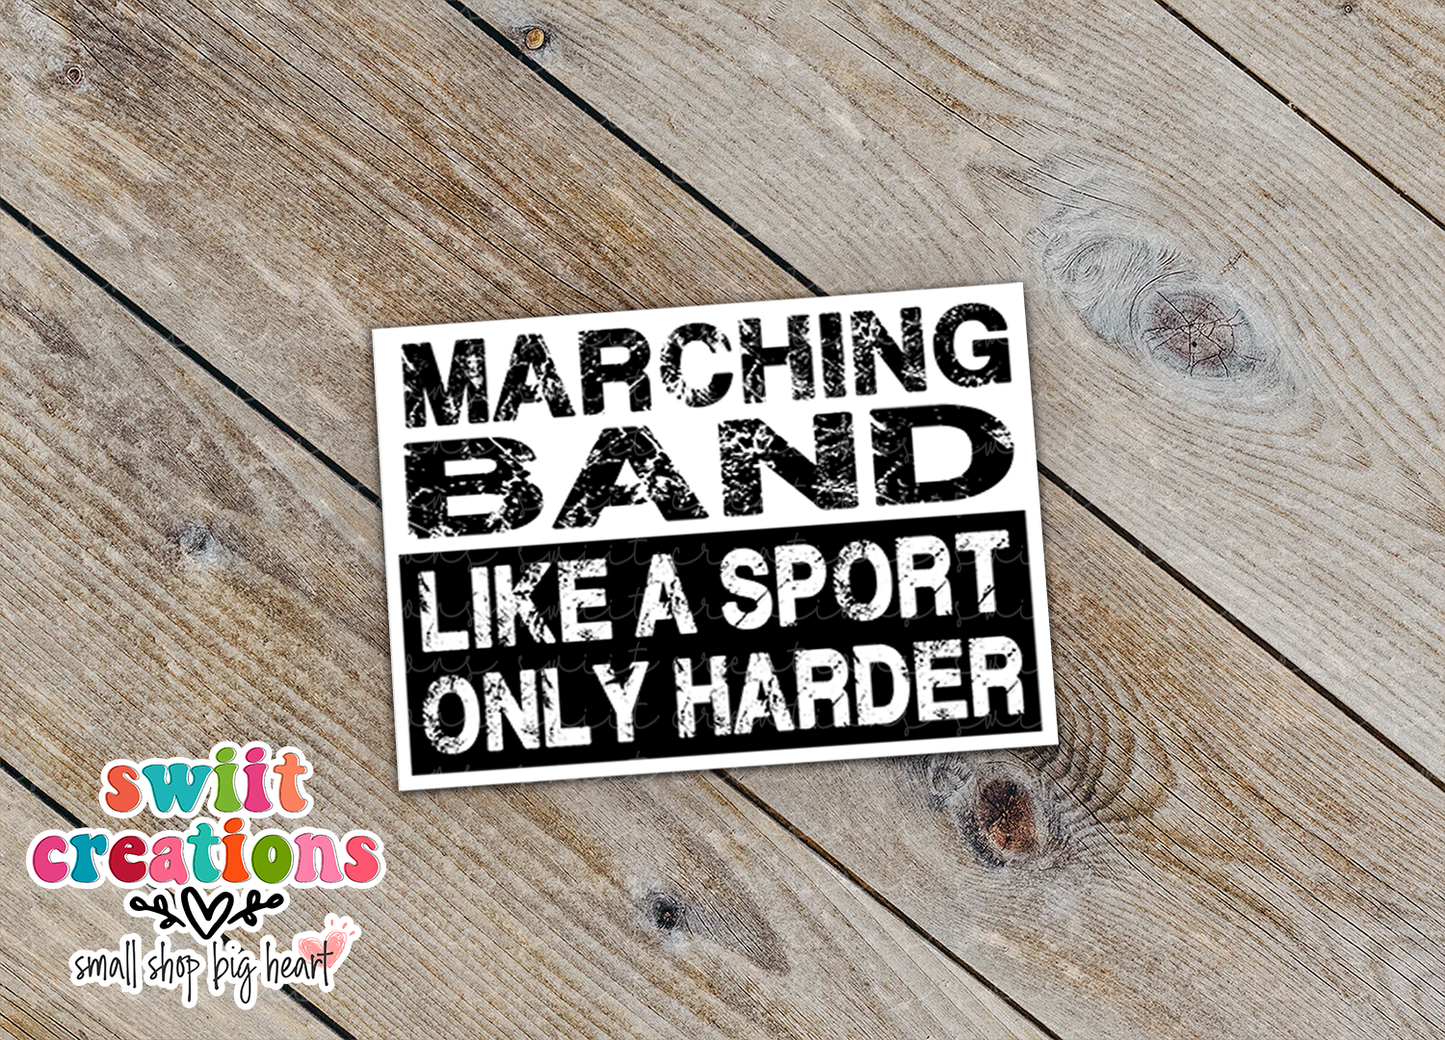 Marching Band Like a Sport Only Harder Sticker (SS074) | SCD165